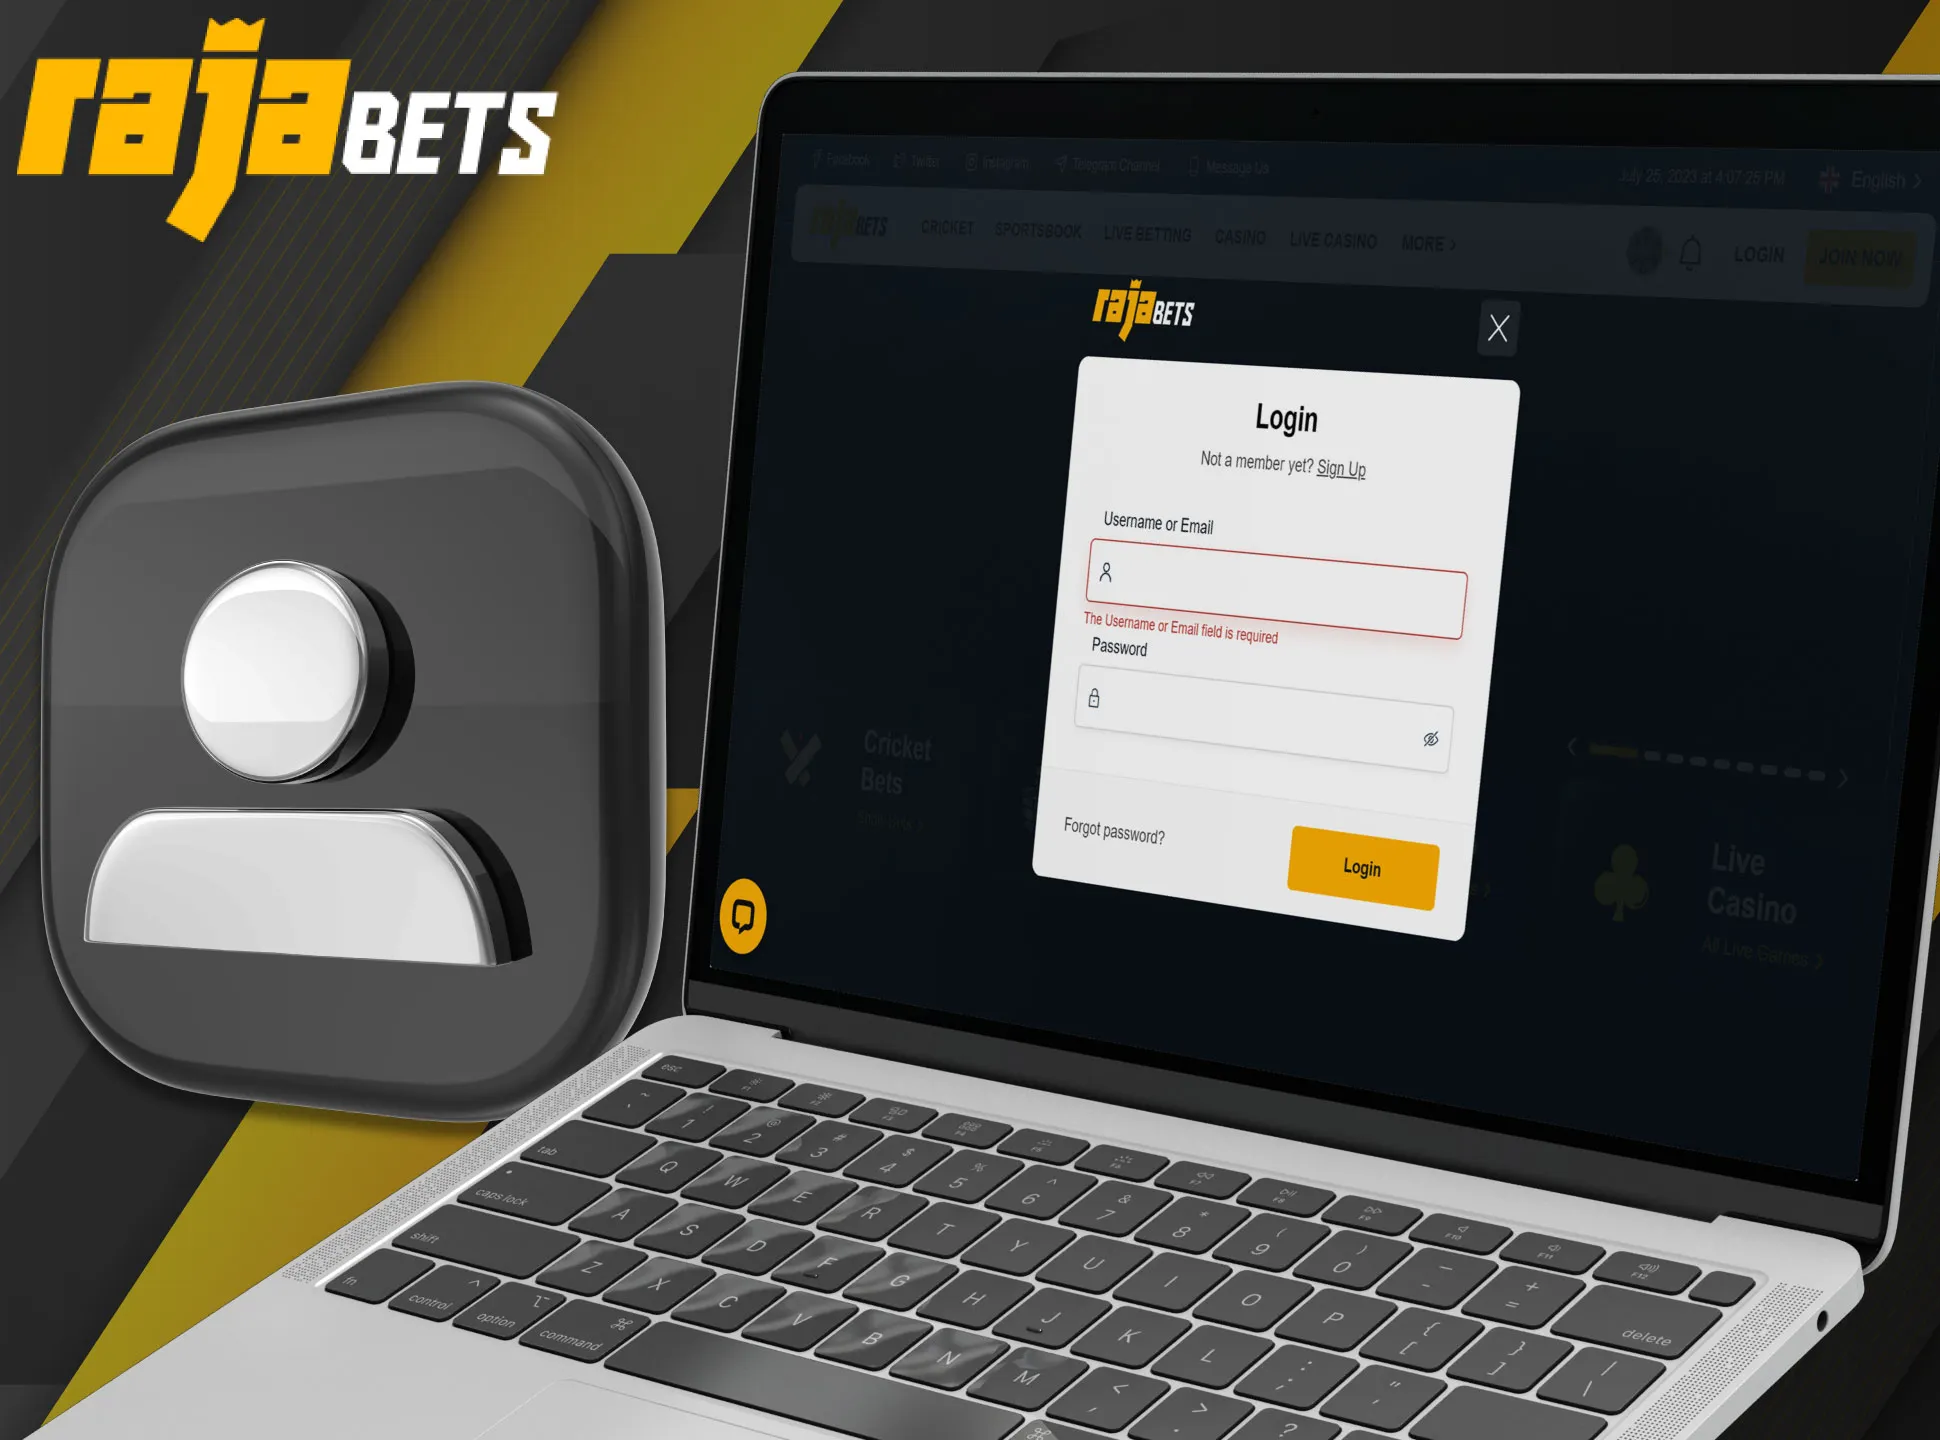 Log in to your Rajabets account with your username and password.